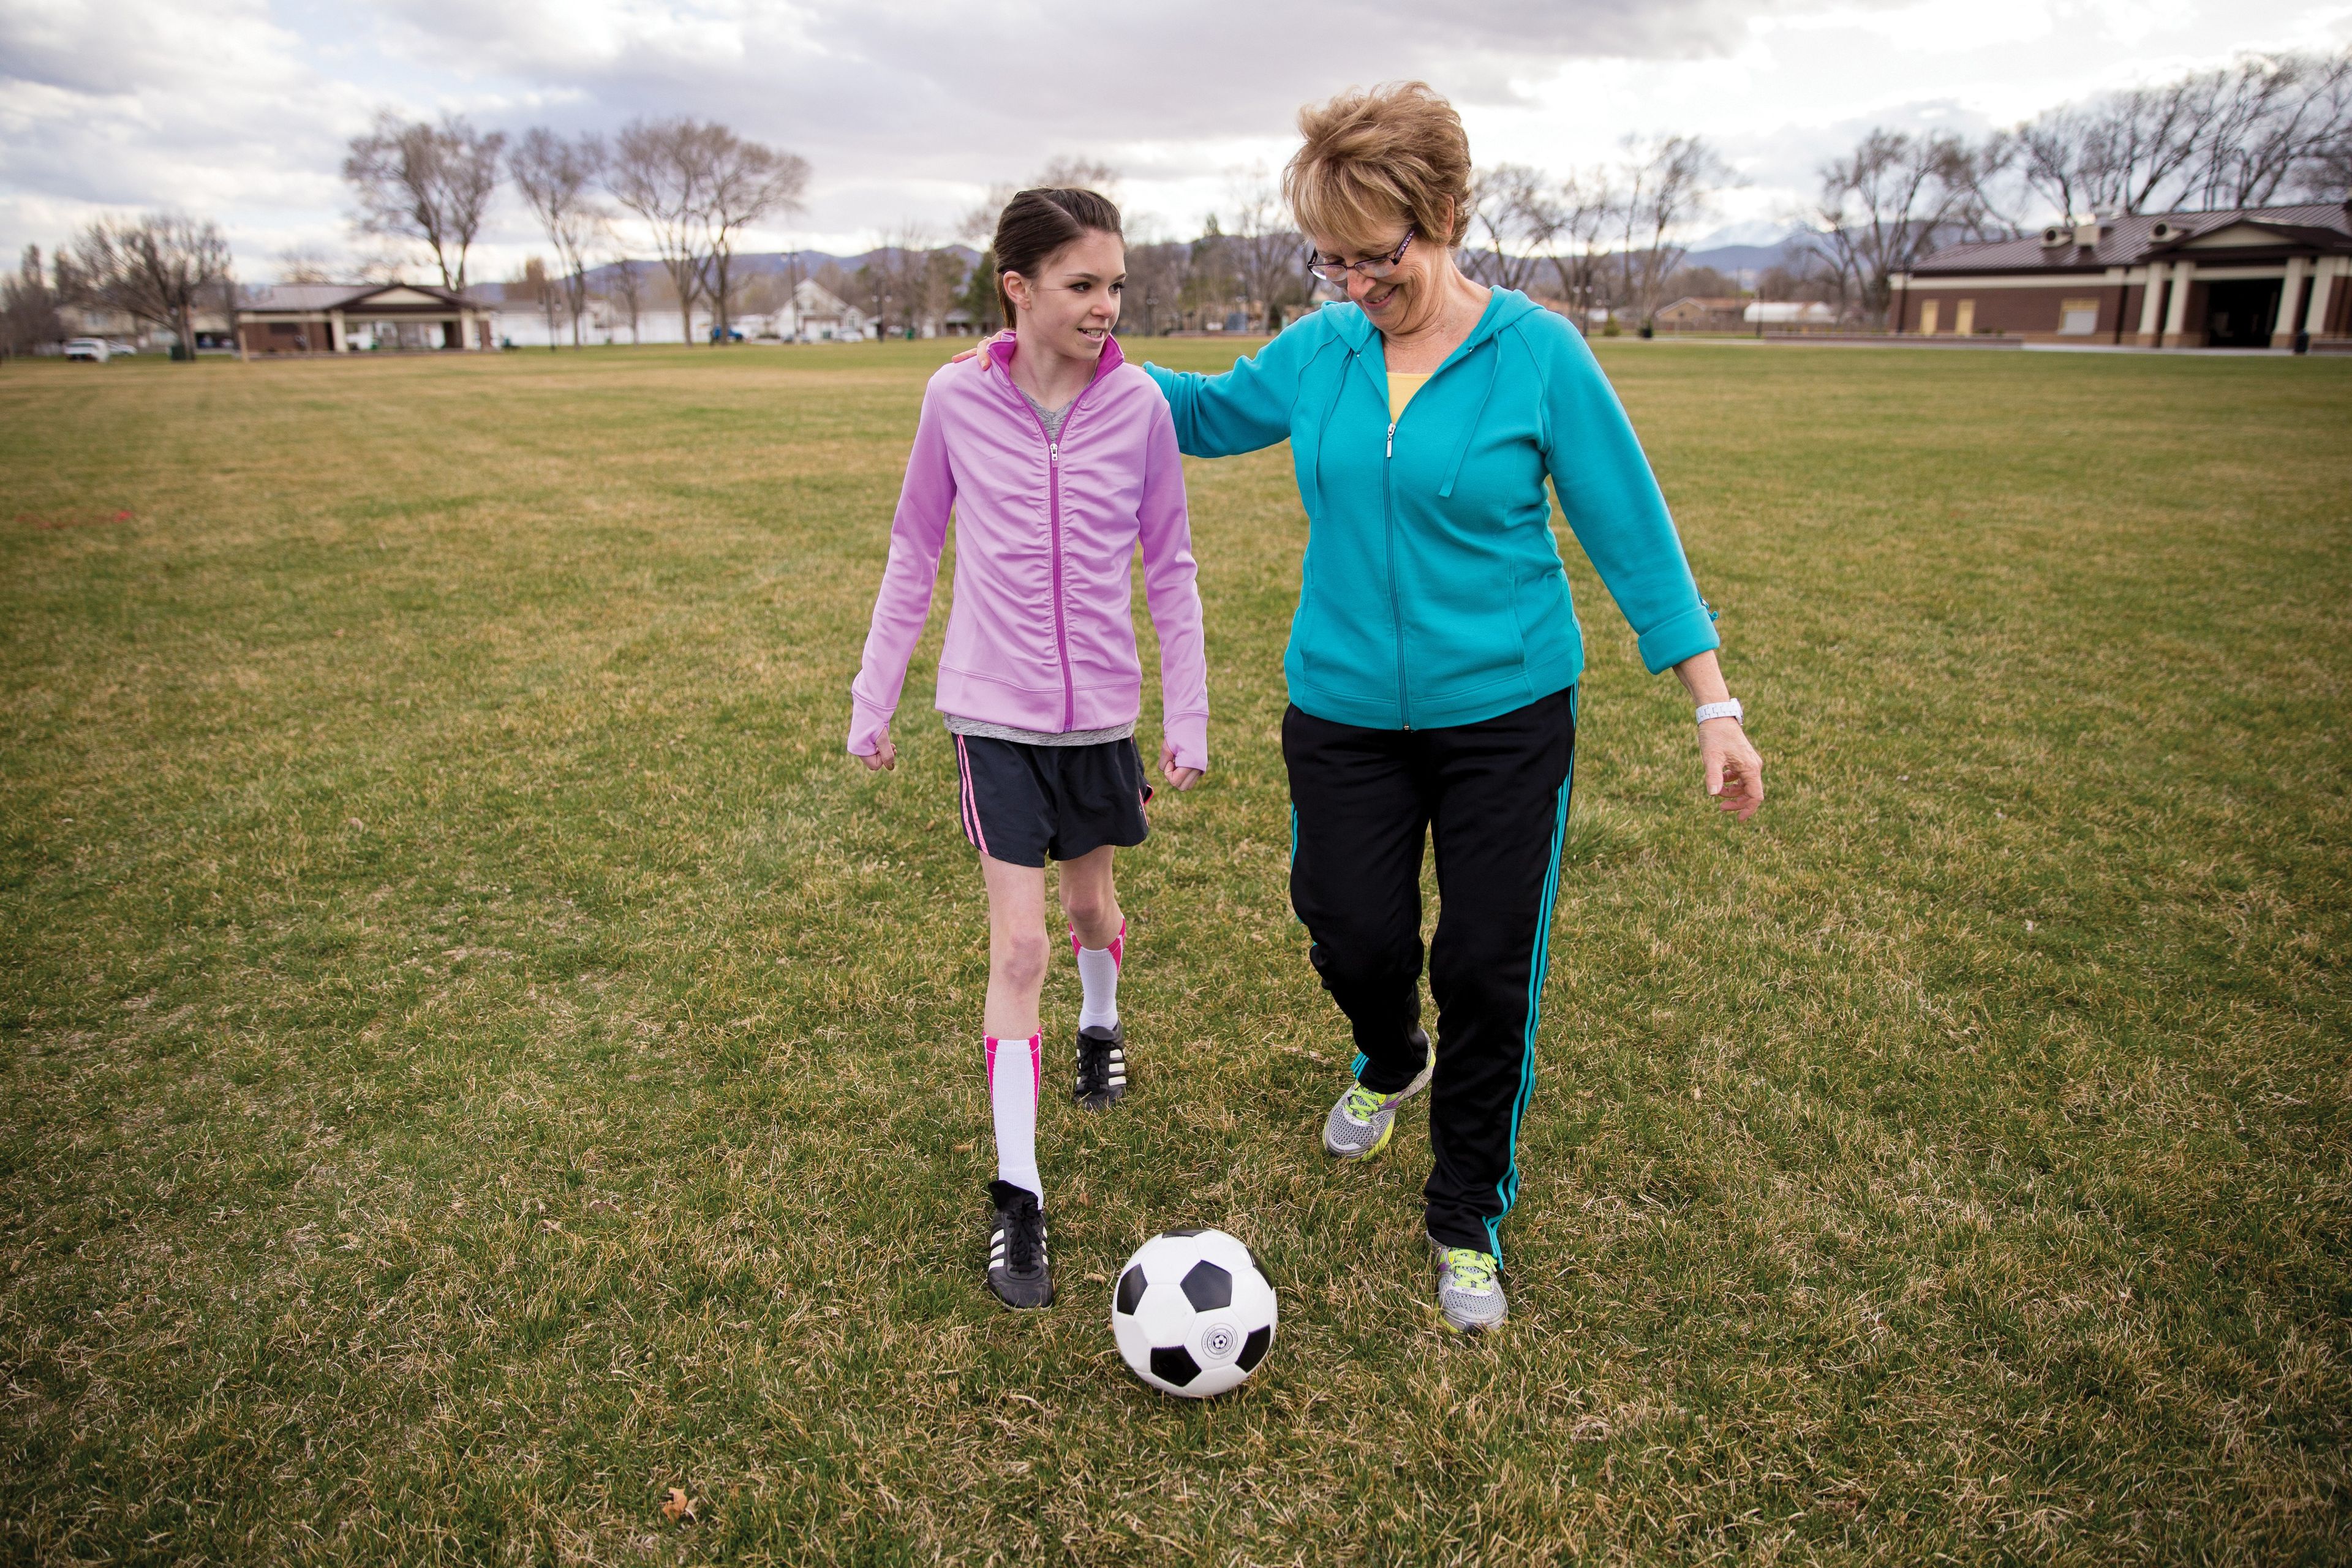 A grandmother plays soccer with her granddaughter in a large field.